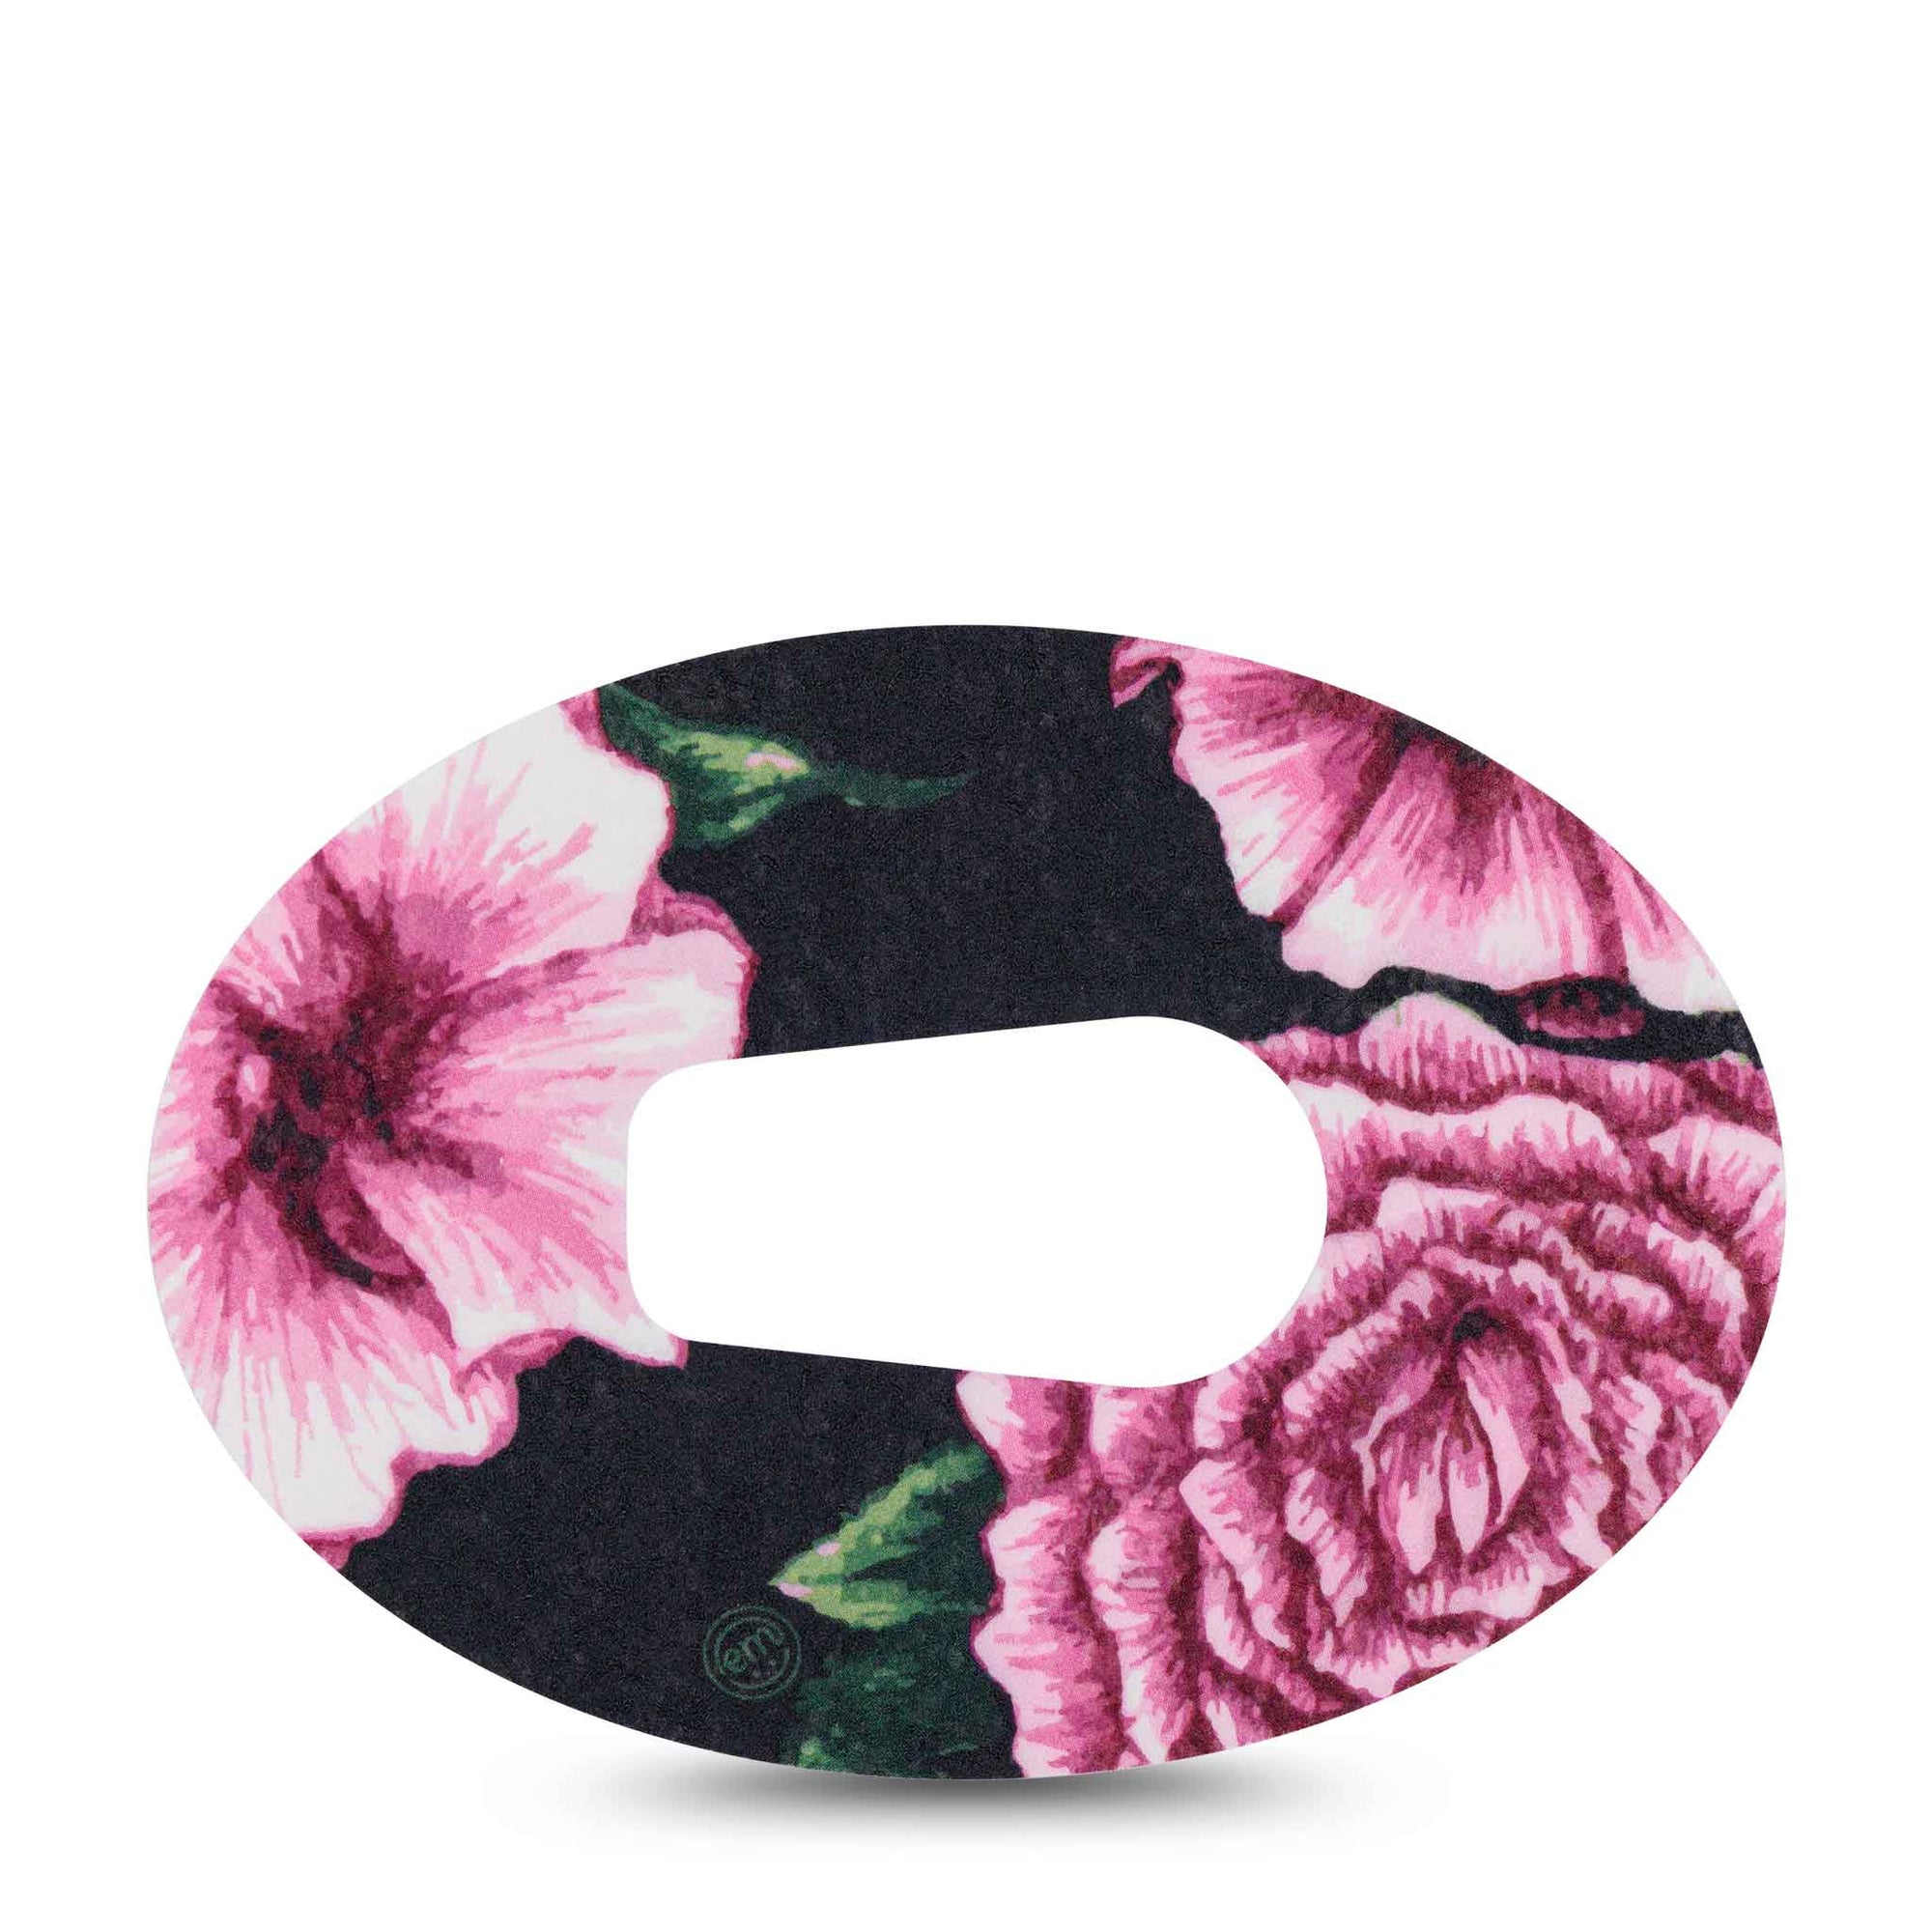 ExpressionMed Intricate Flower Dexcom G6 Tape